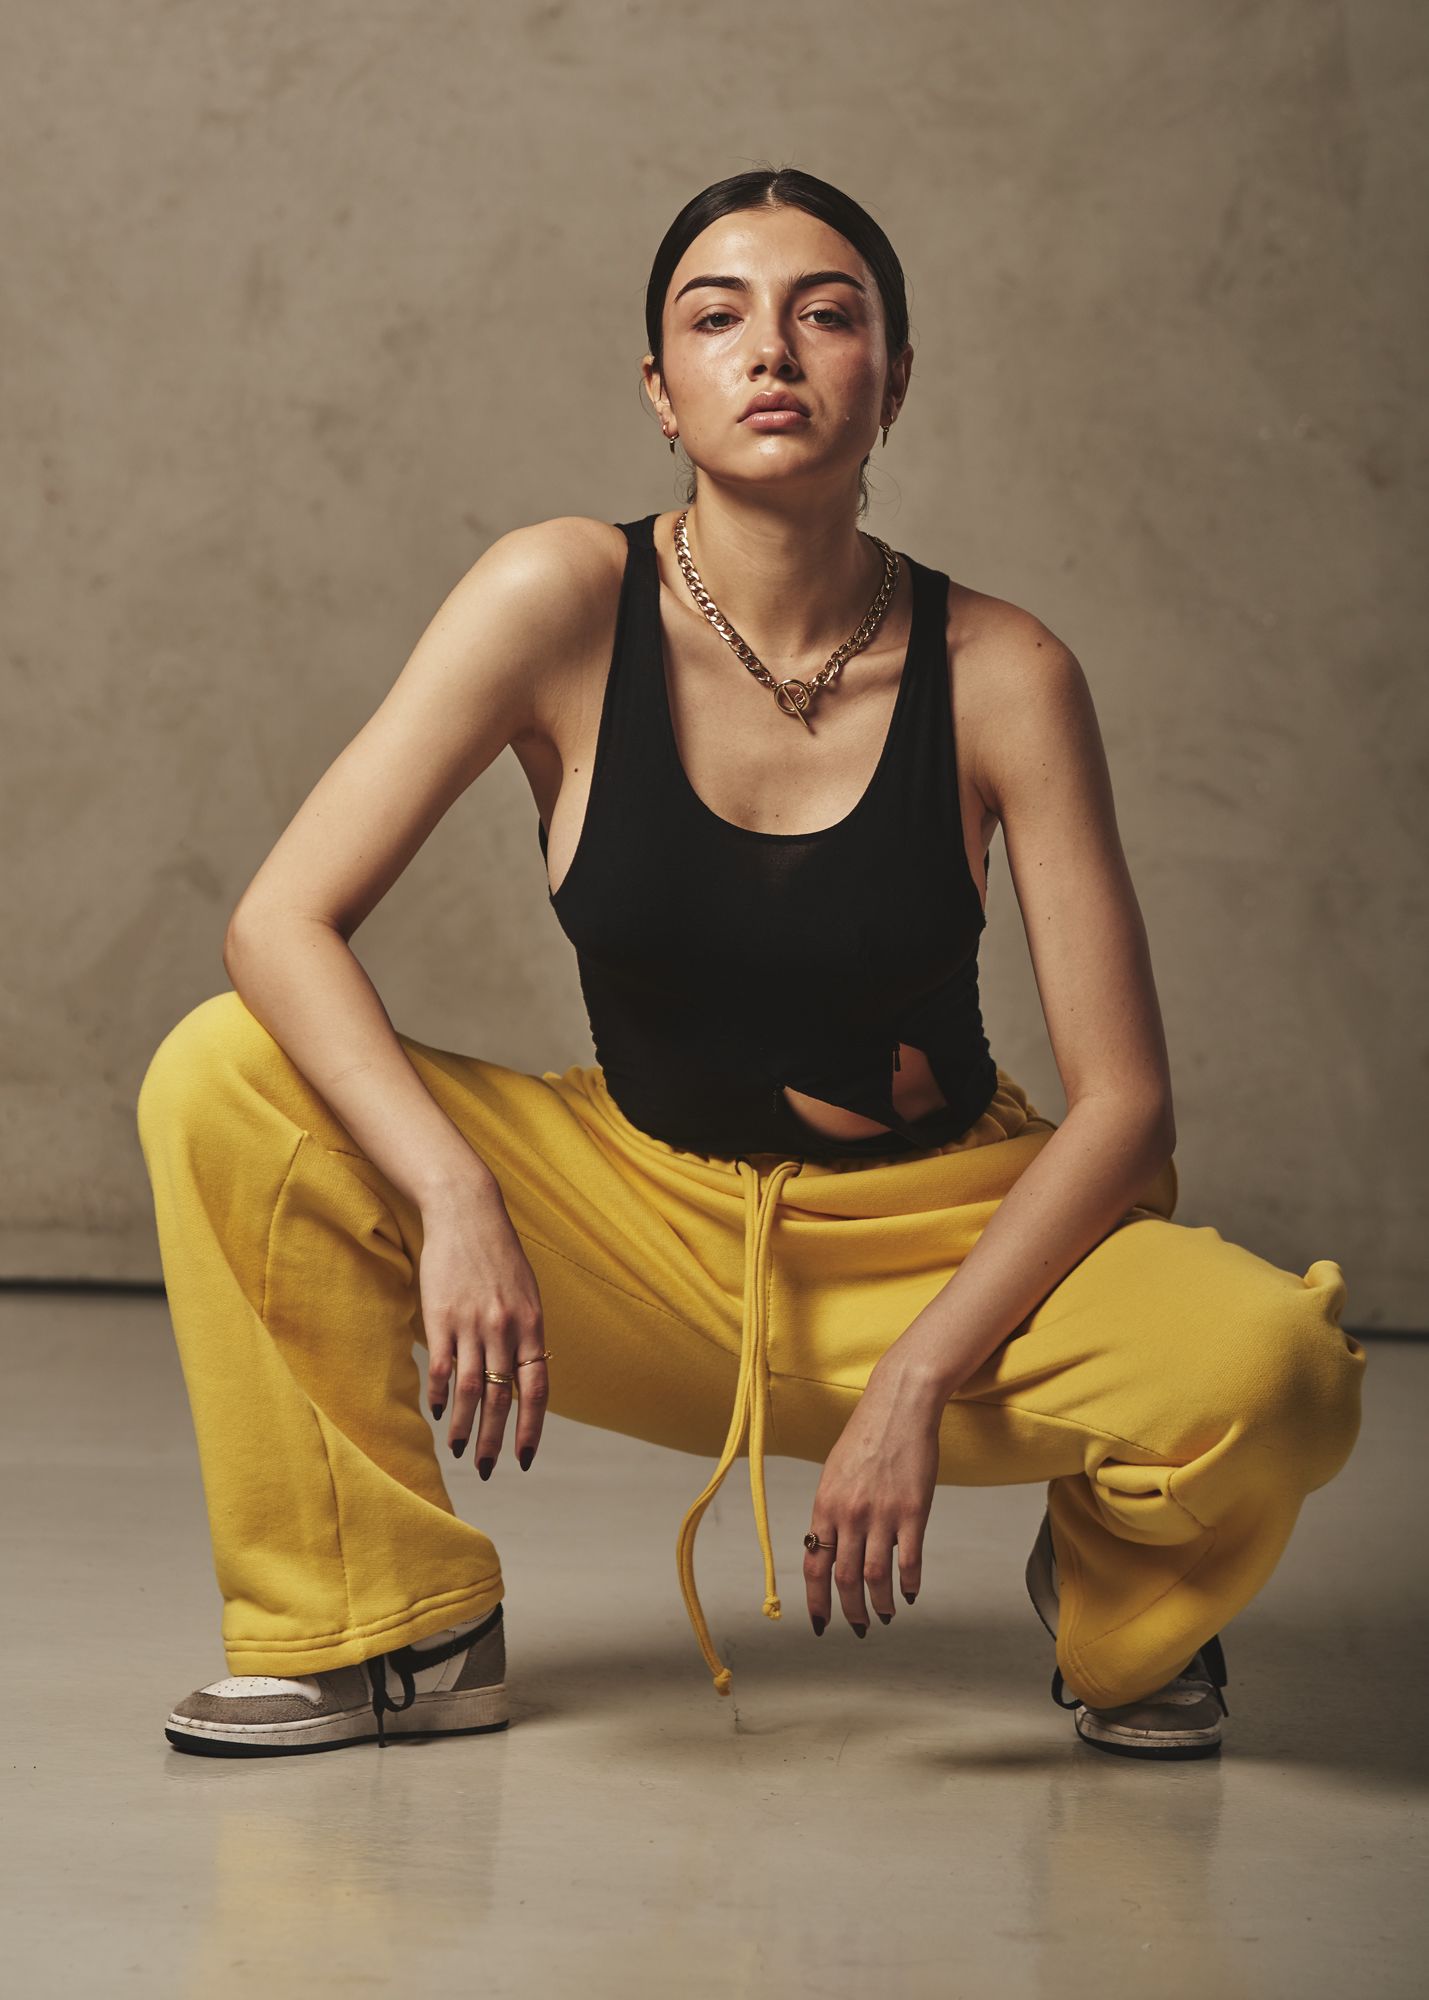 A woman modelling athletic attire, comprising yellow sweatpants, a black tank top with cut outs, and a gold chain neckalce. The model is crouched in a squatted position